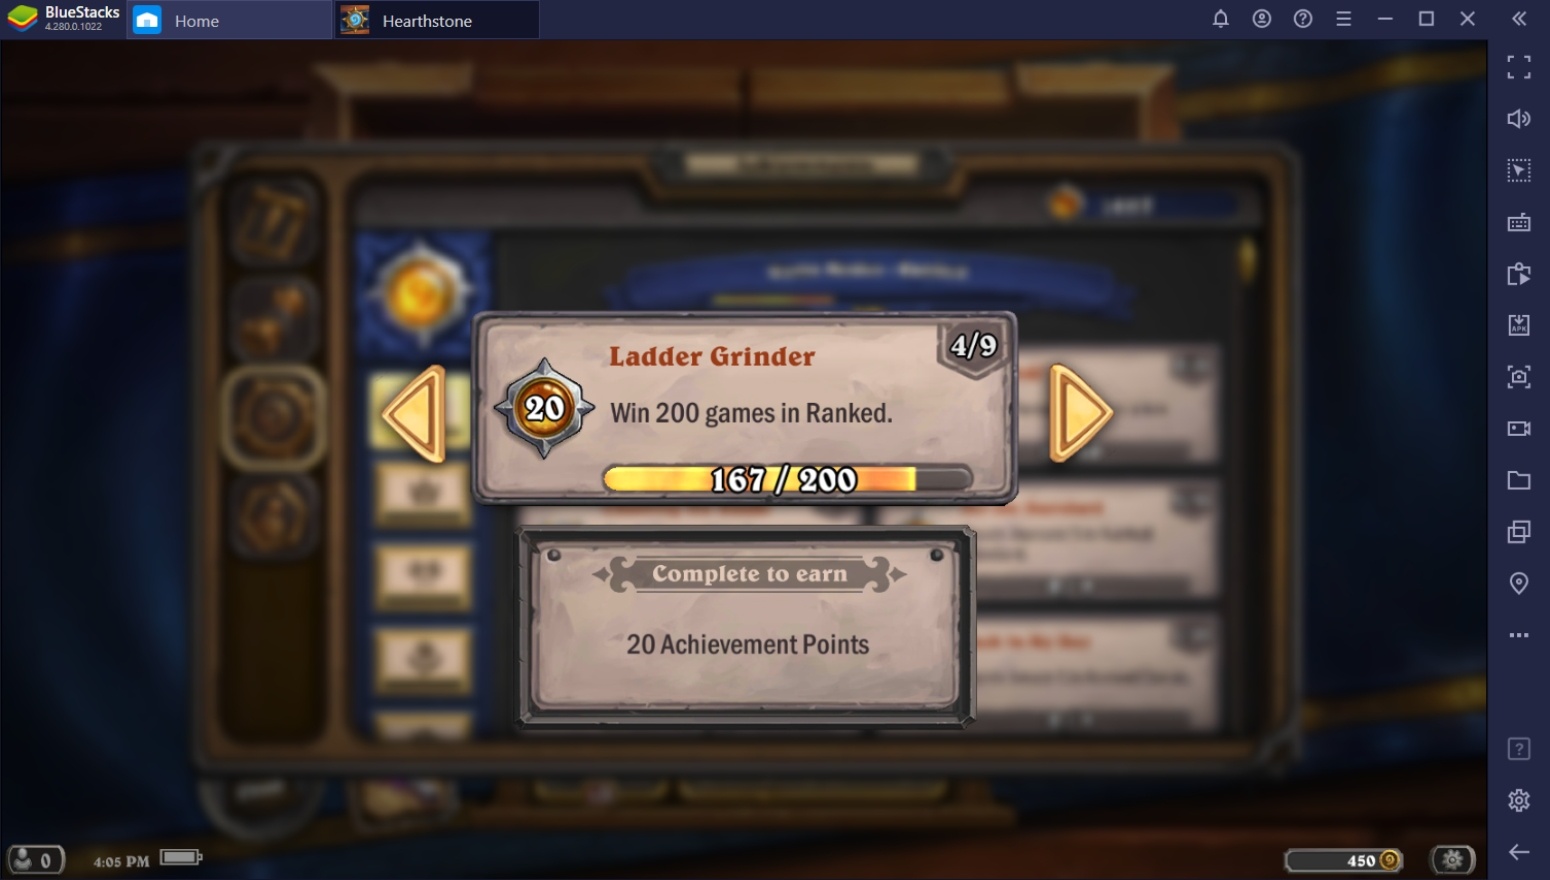 BlueStacks' Beginners Guide to Playing Hearthstone